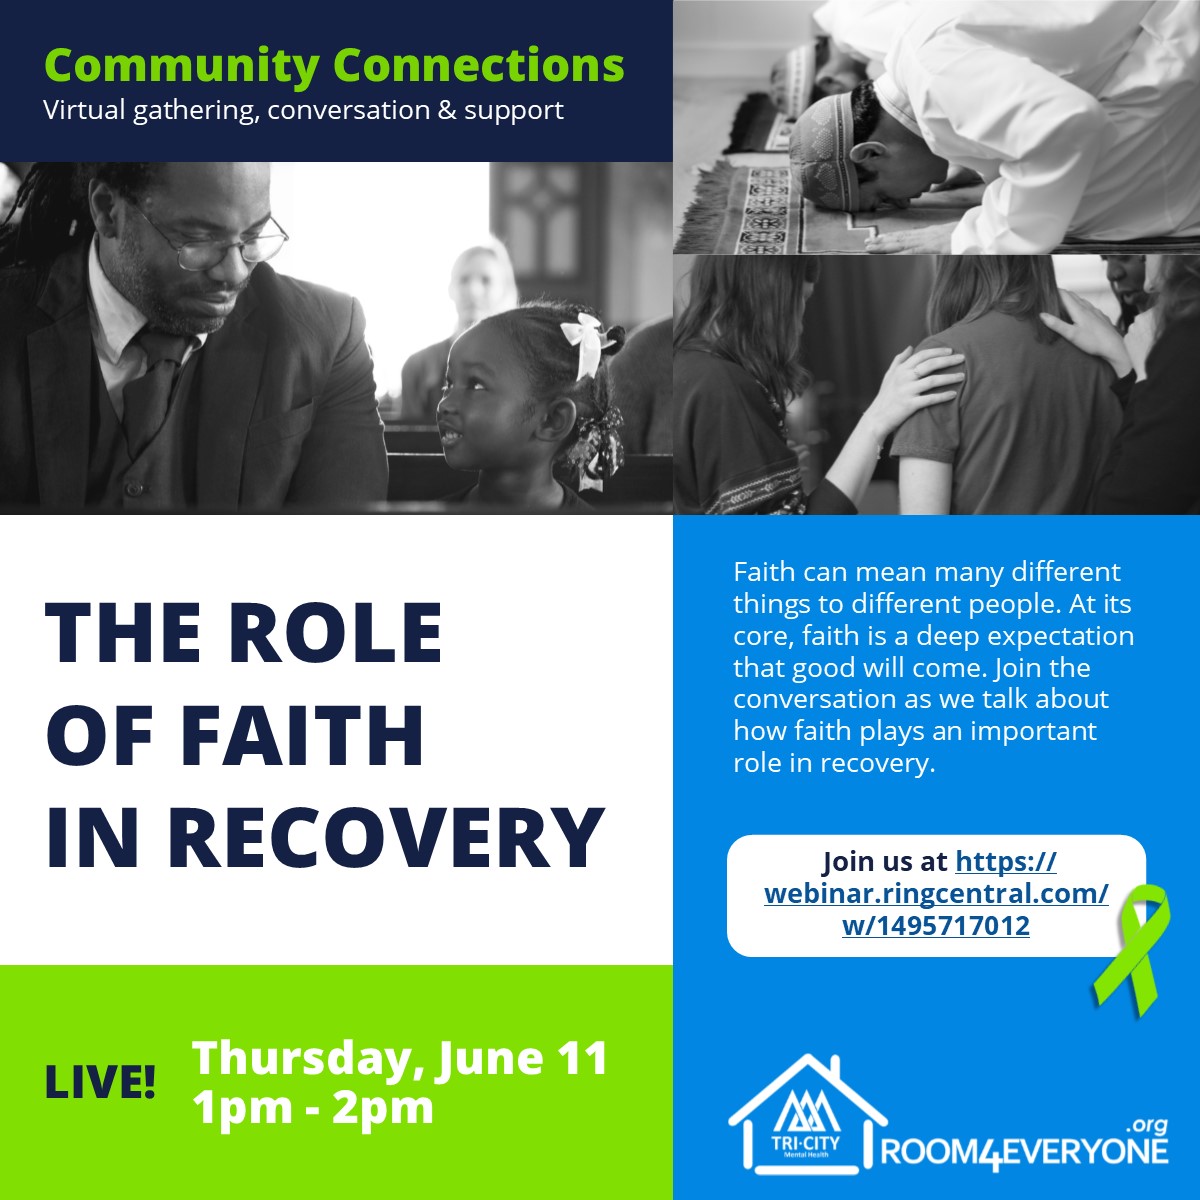 06 11 20 Community Connections Role of Faith in Recovery